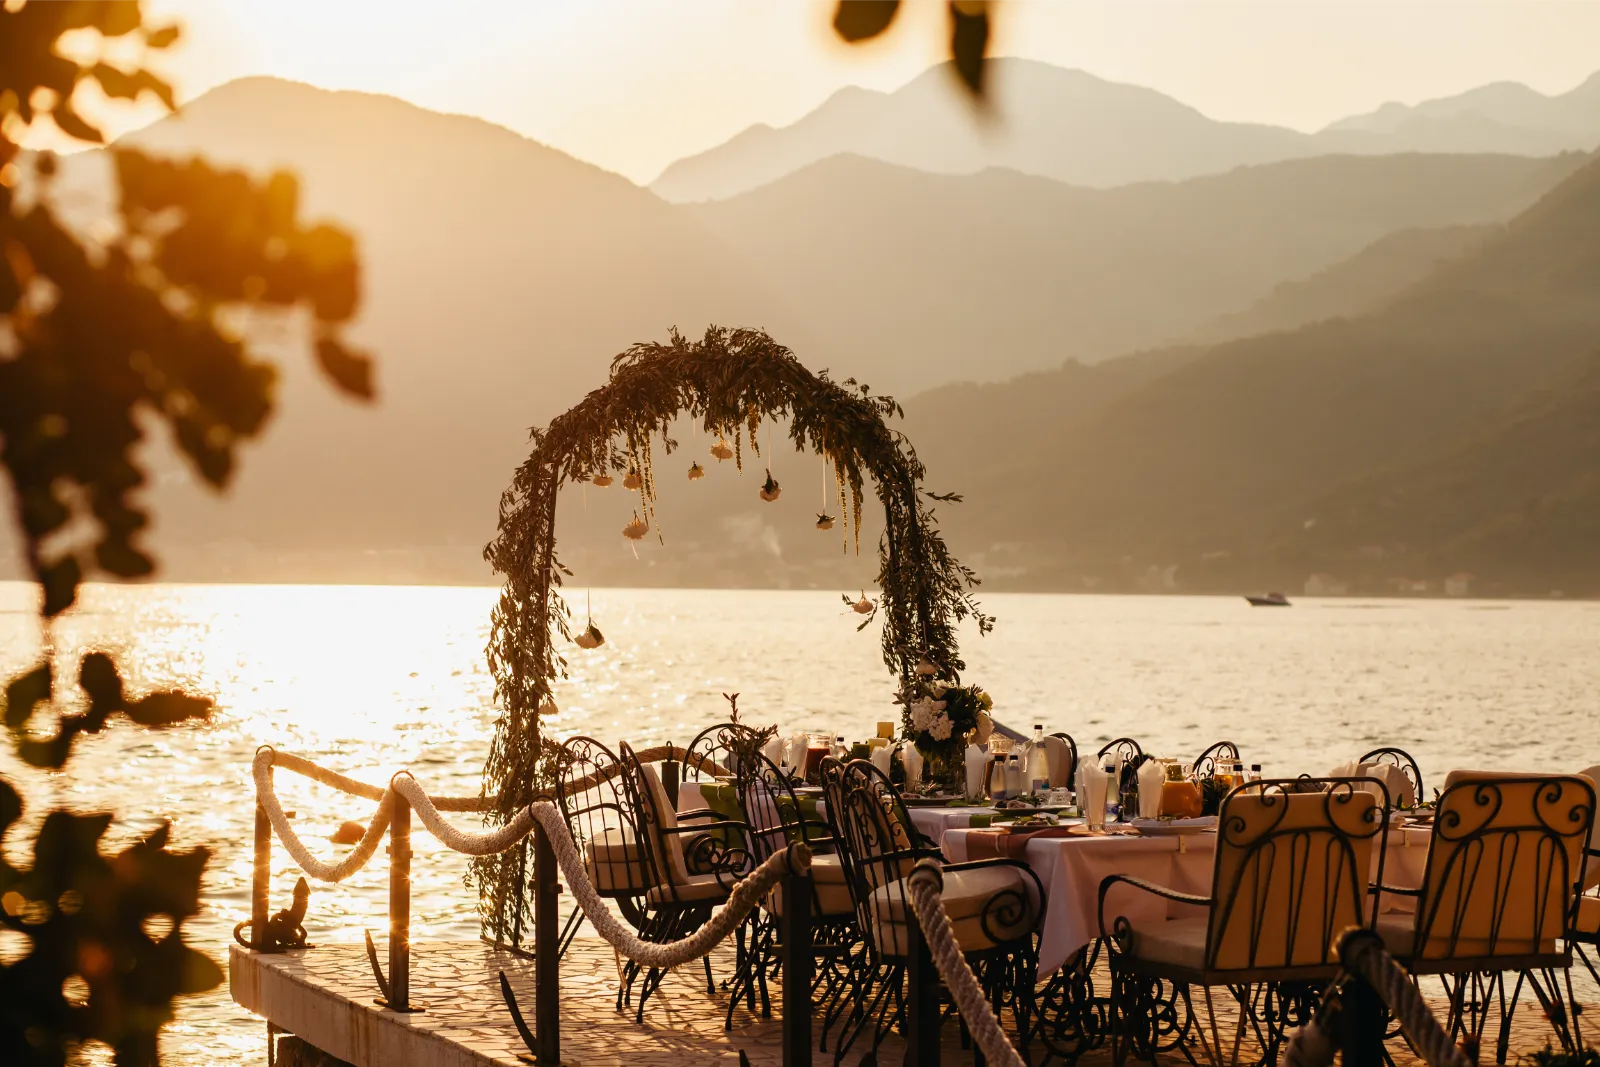 Wedding arch by a lake in a sunny Mediterranean country for a wedding after getting a Certificate of No Impediment to get married abroad.